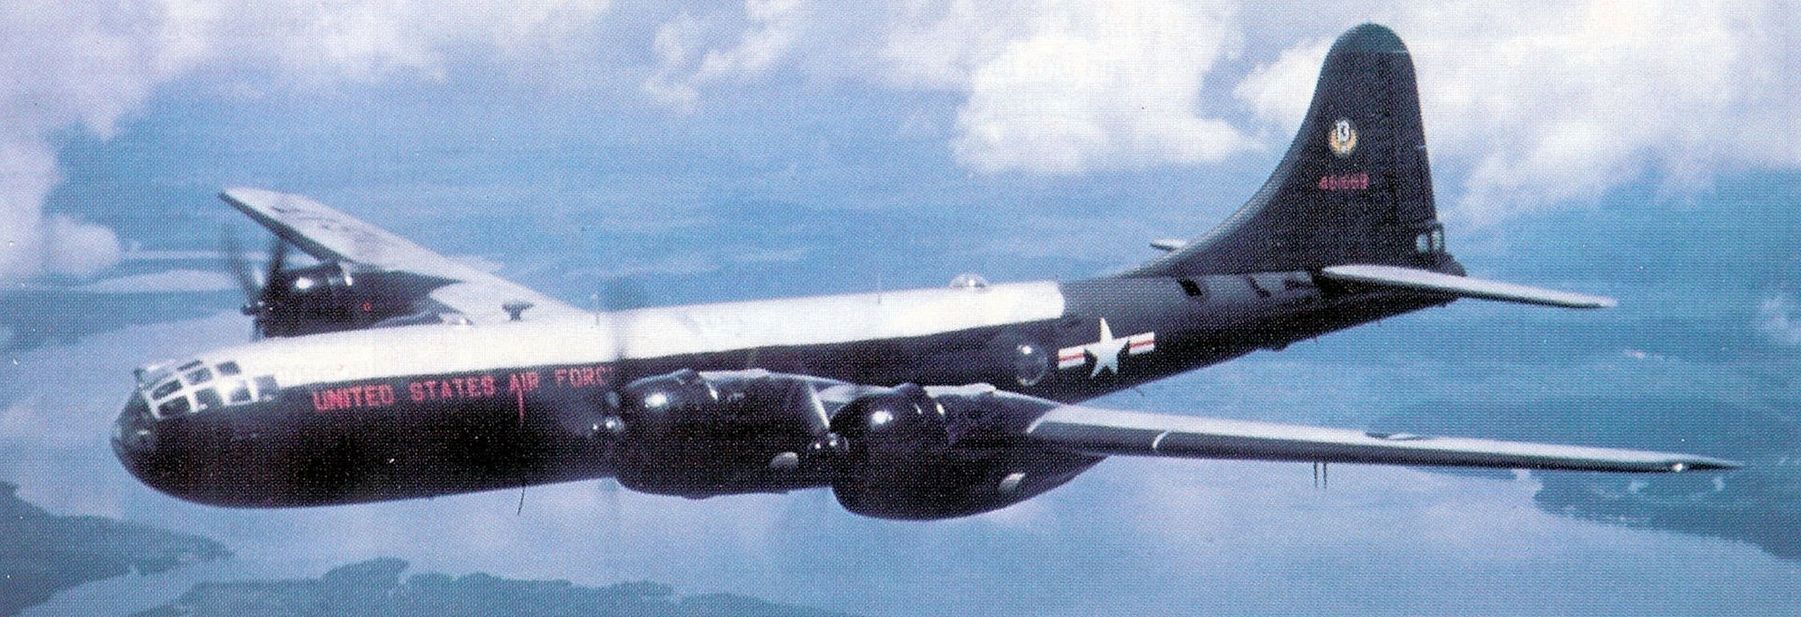 Boeing B-29A-40-BN Superfortress, 44-61669 image. Click for full size.